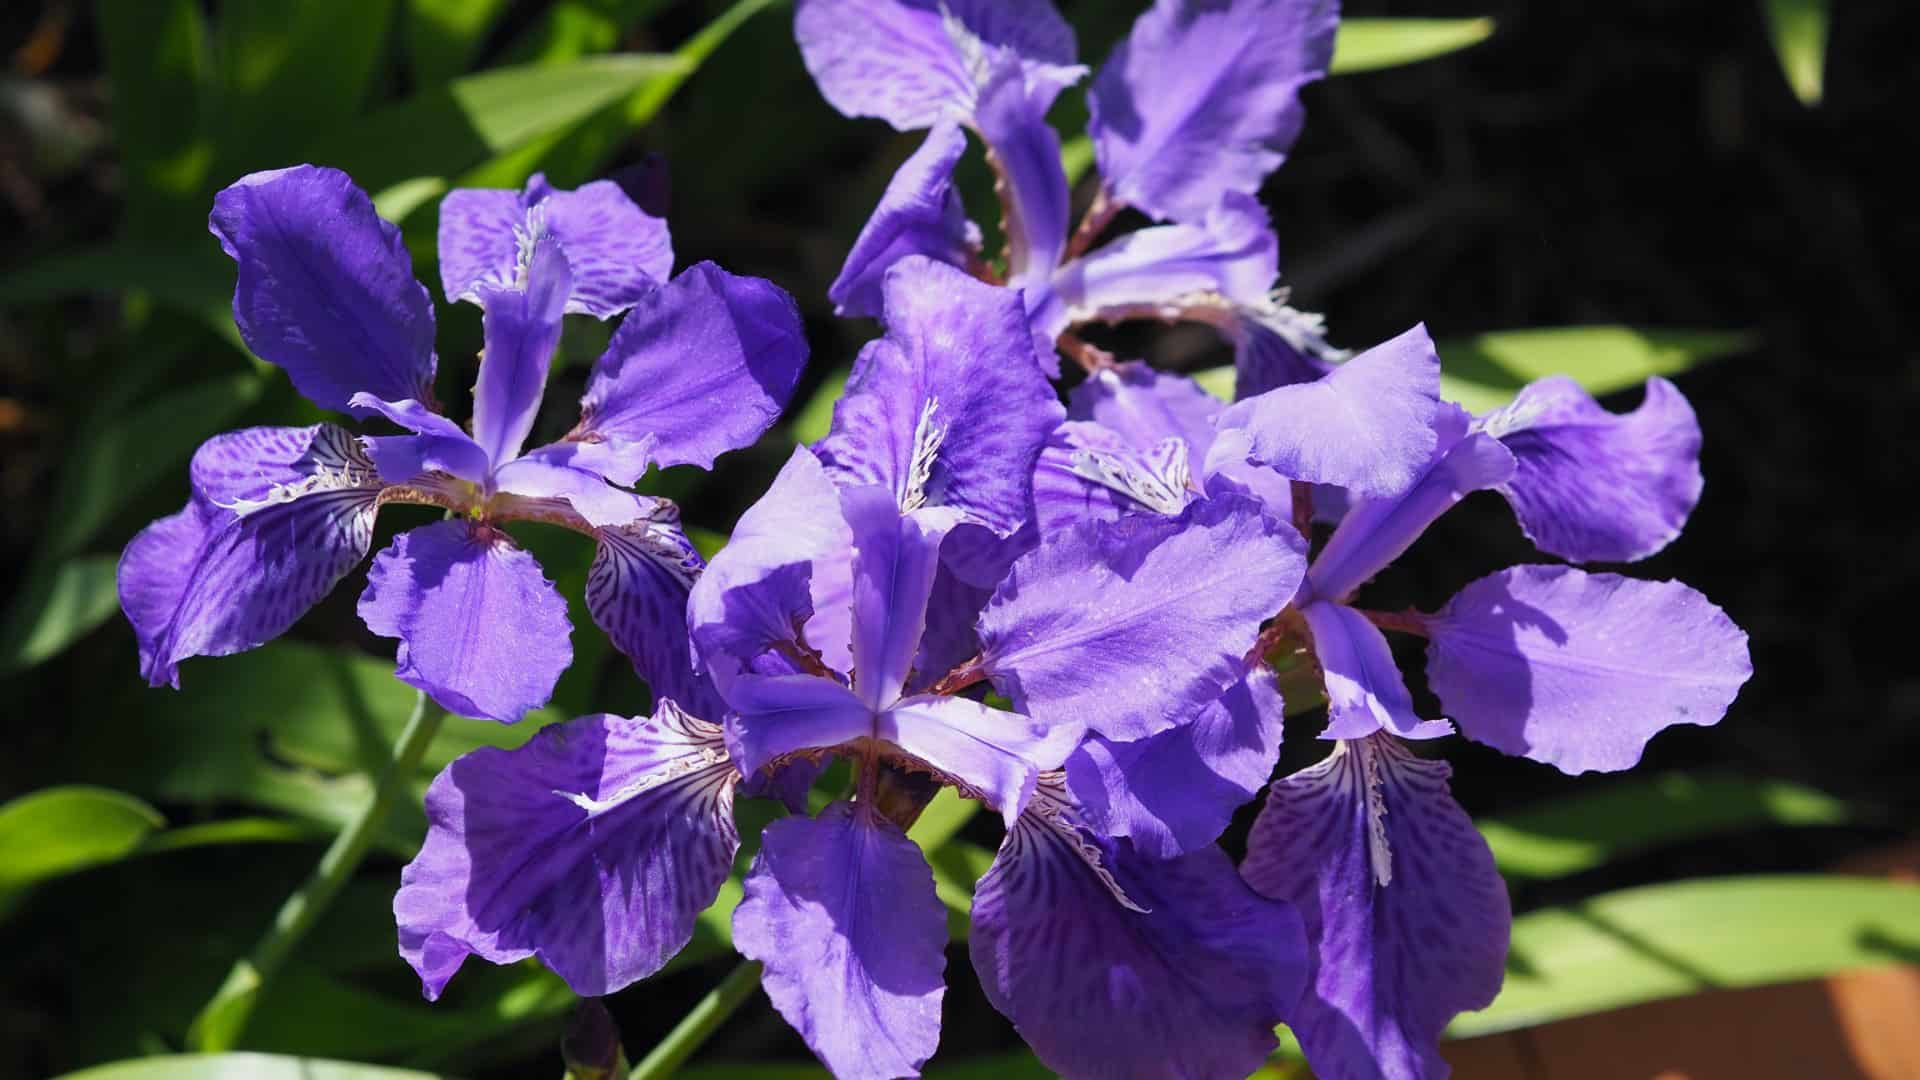 Close up view of purple flowers